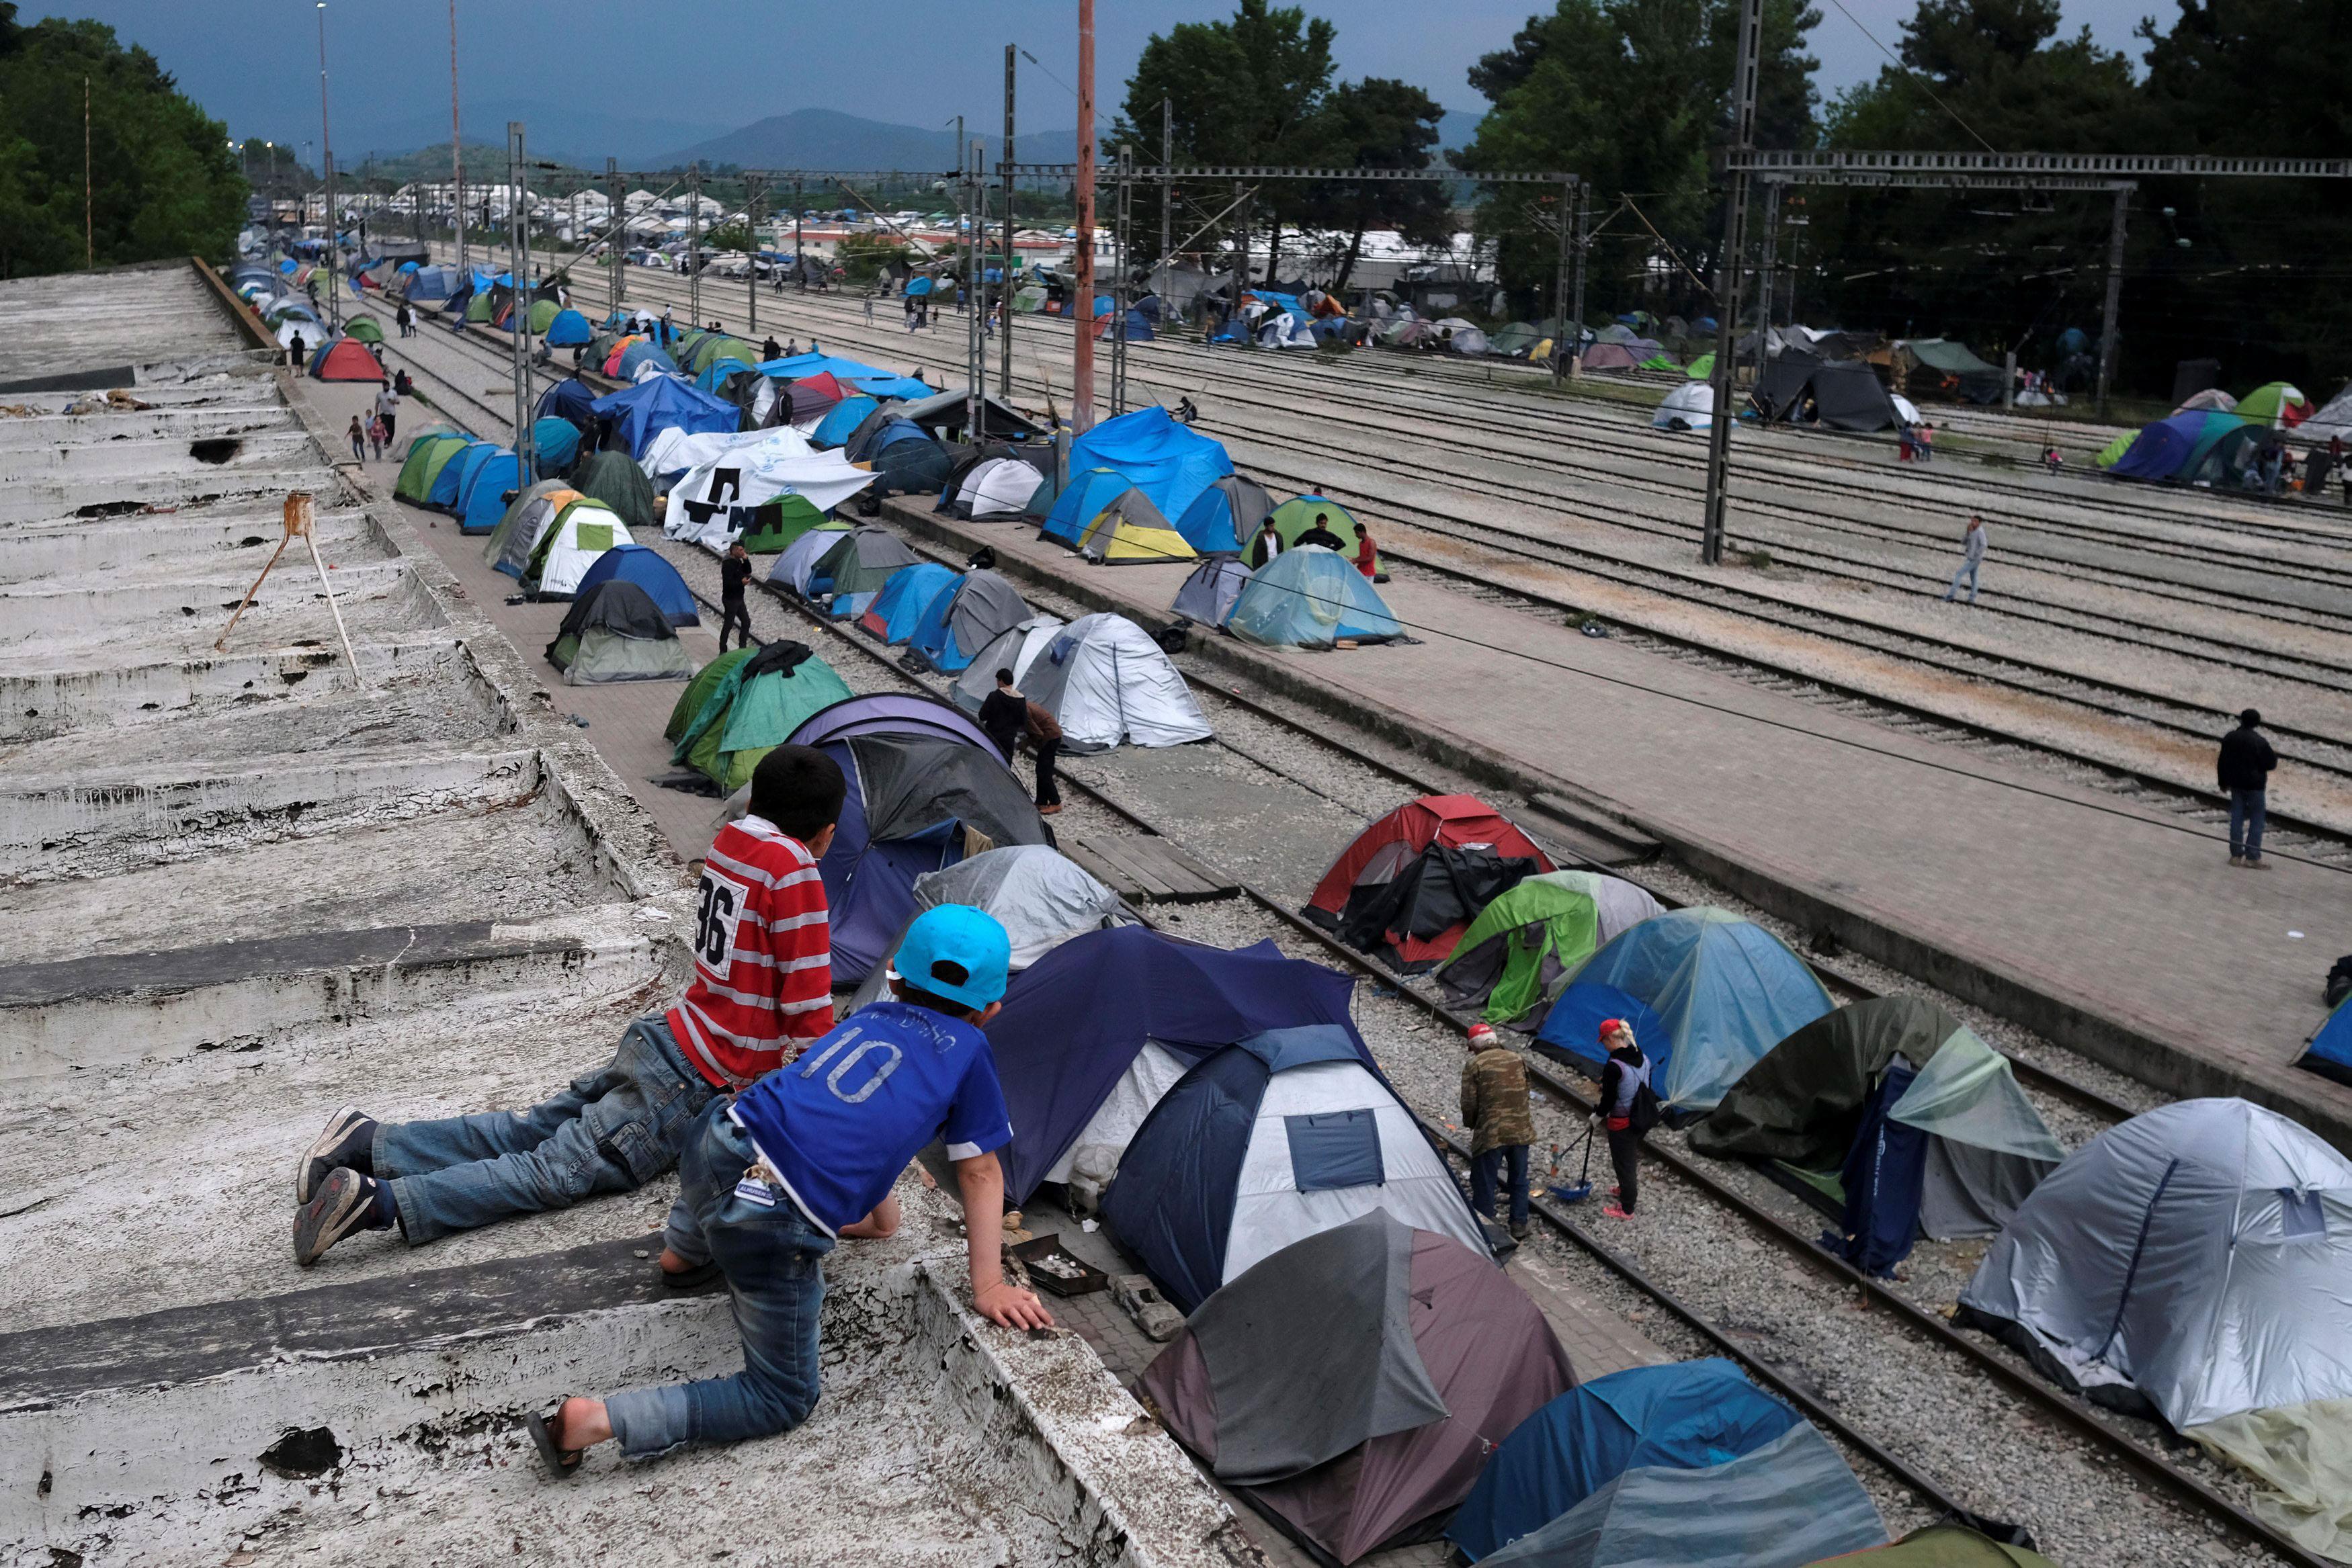 Boys look at tents from a roof of a train station at a makeshift camp for migrants and refugees at t